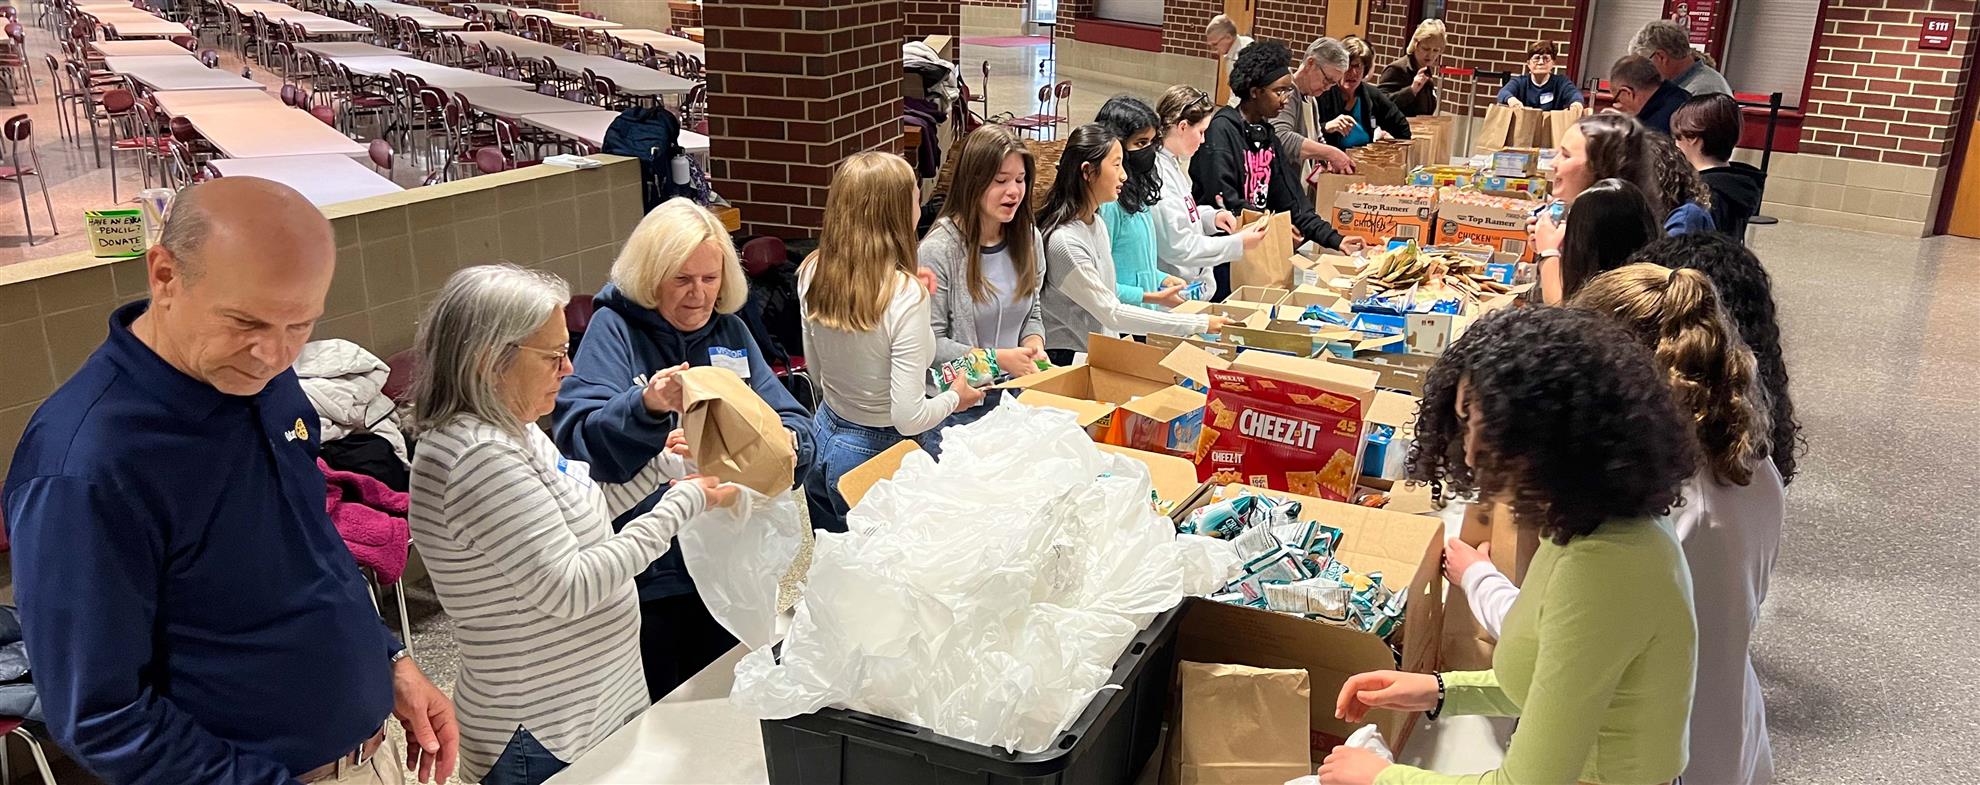 Snack Packing with Northwestern Lehigh High Schools Interact students